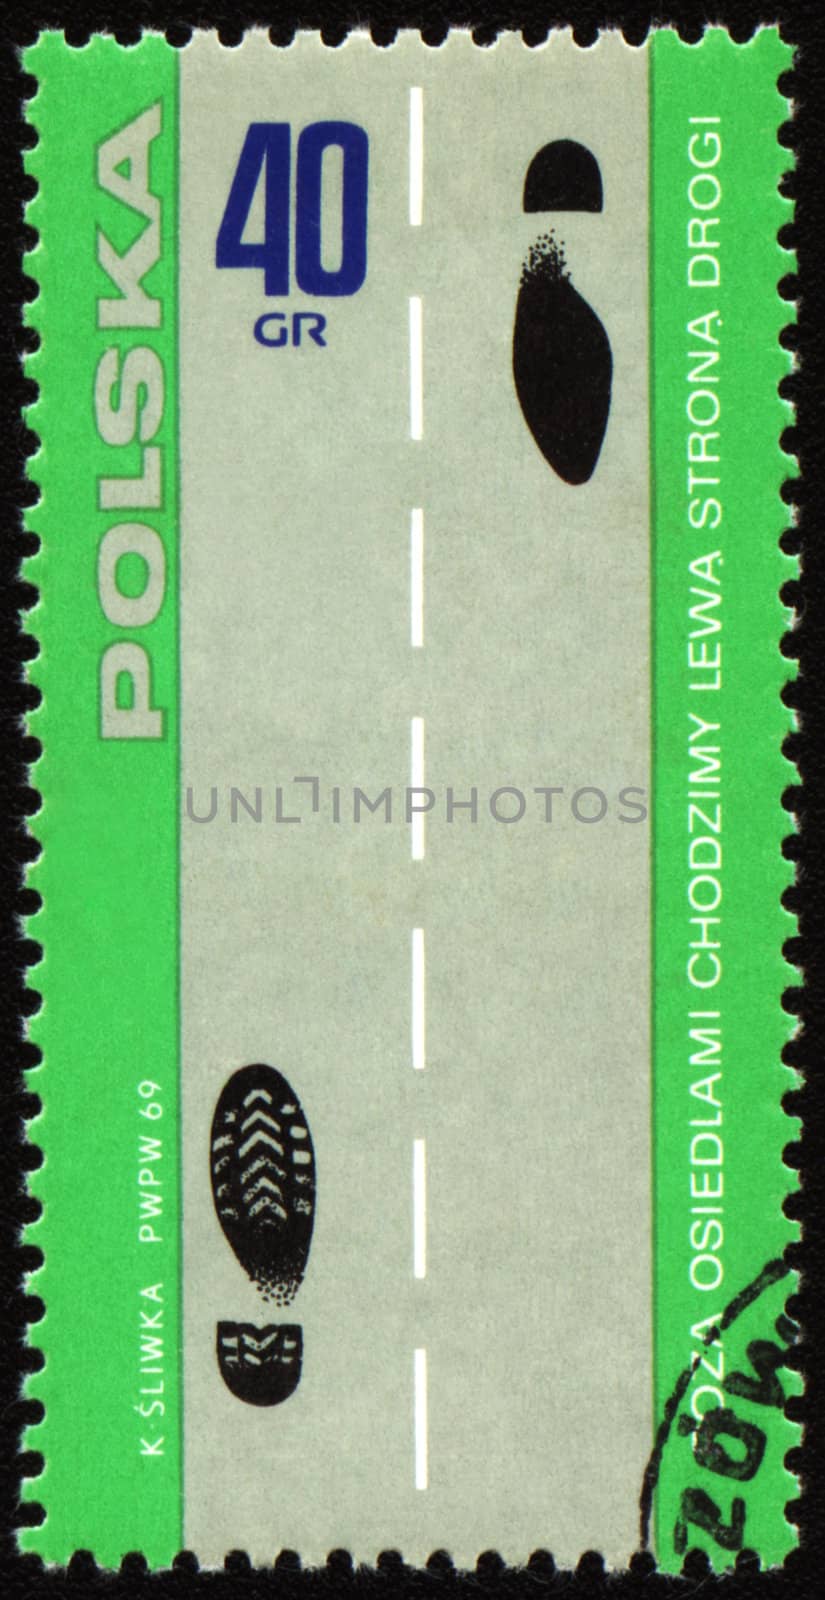 POLAND - CIRCA 1969: a stamp printed in Poland shows scheme for foot-passenger, explaining rules of the road, circa 1969